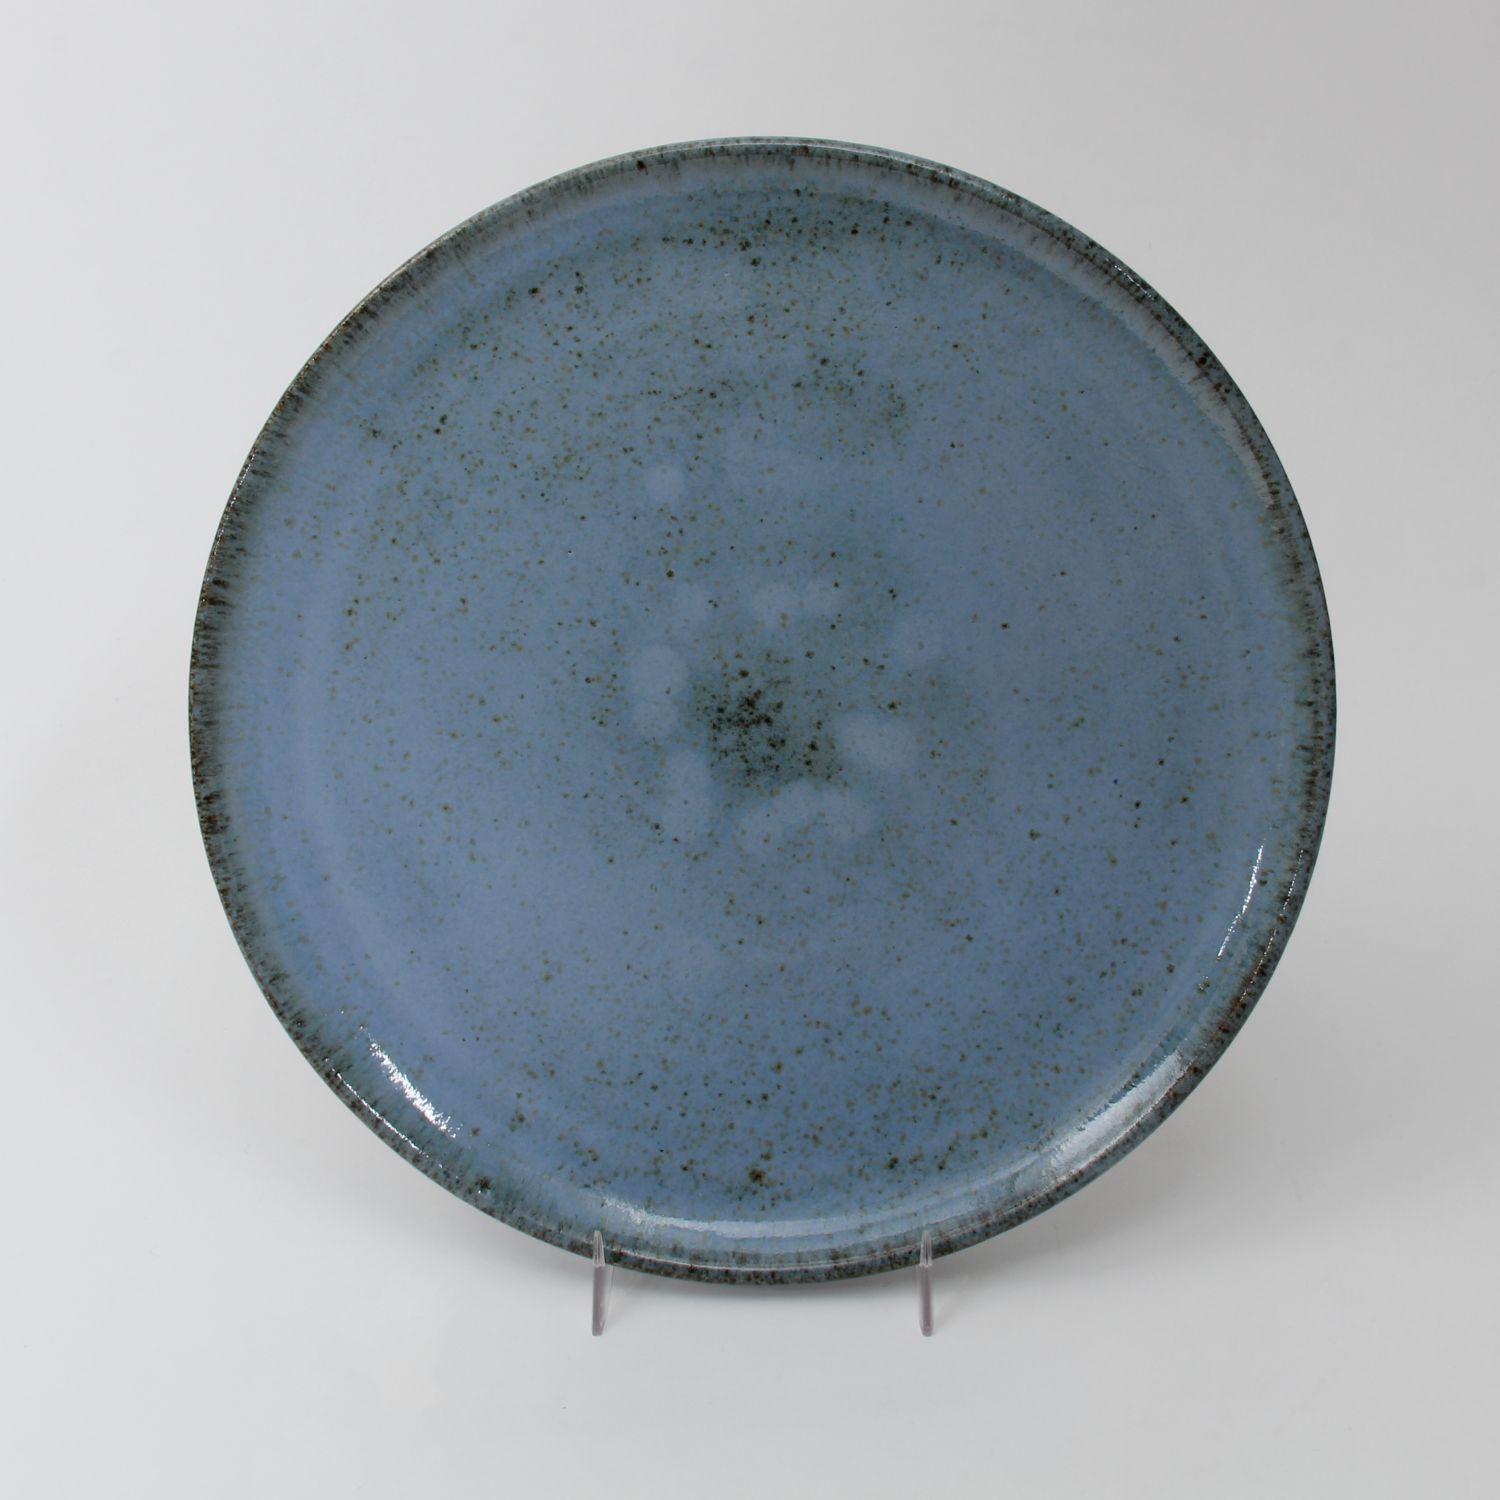 Junichi Tanaka: Dinner Plate in Blue Product Image 1 of 2